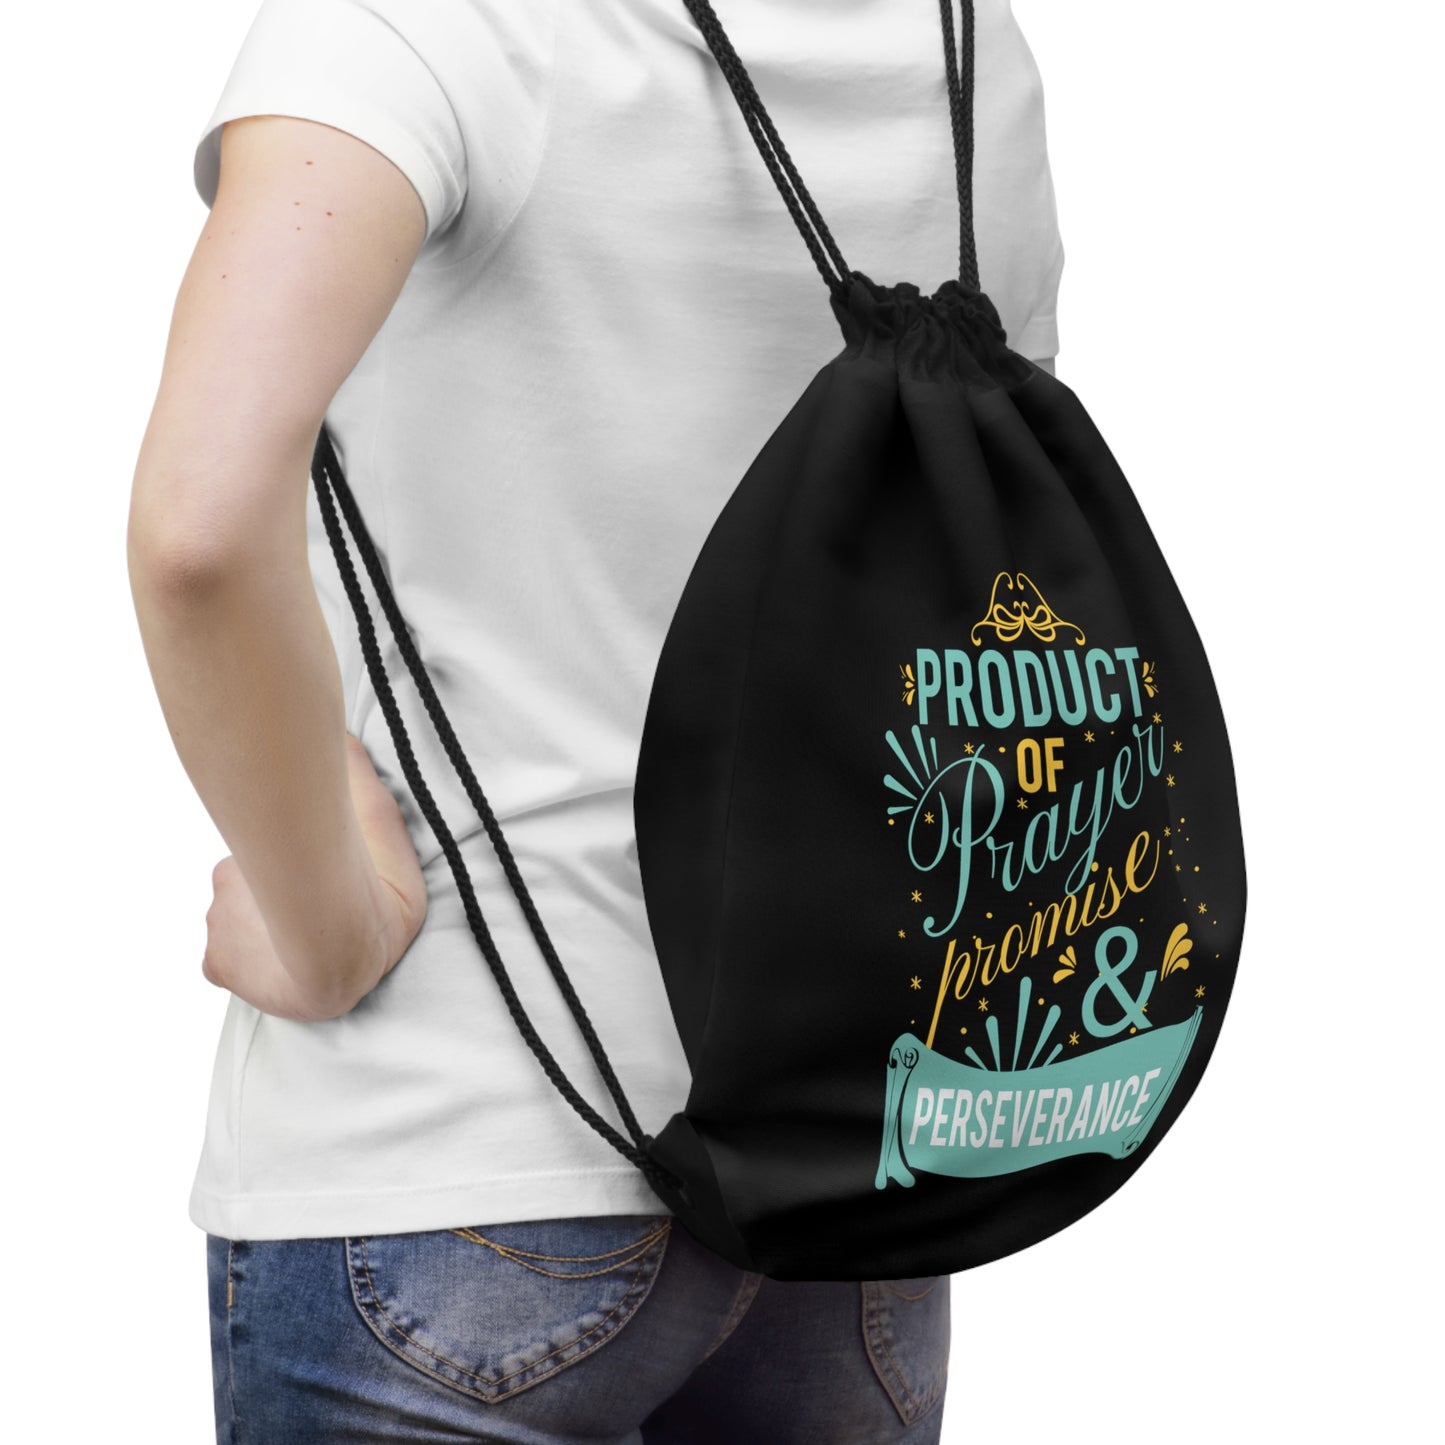 Product Of Prayer, Promise, & Perseverance Drawstring Bag